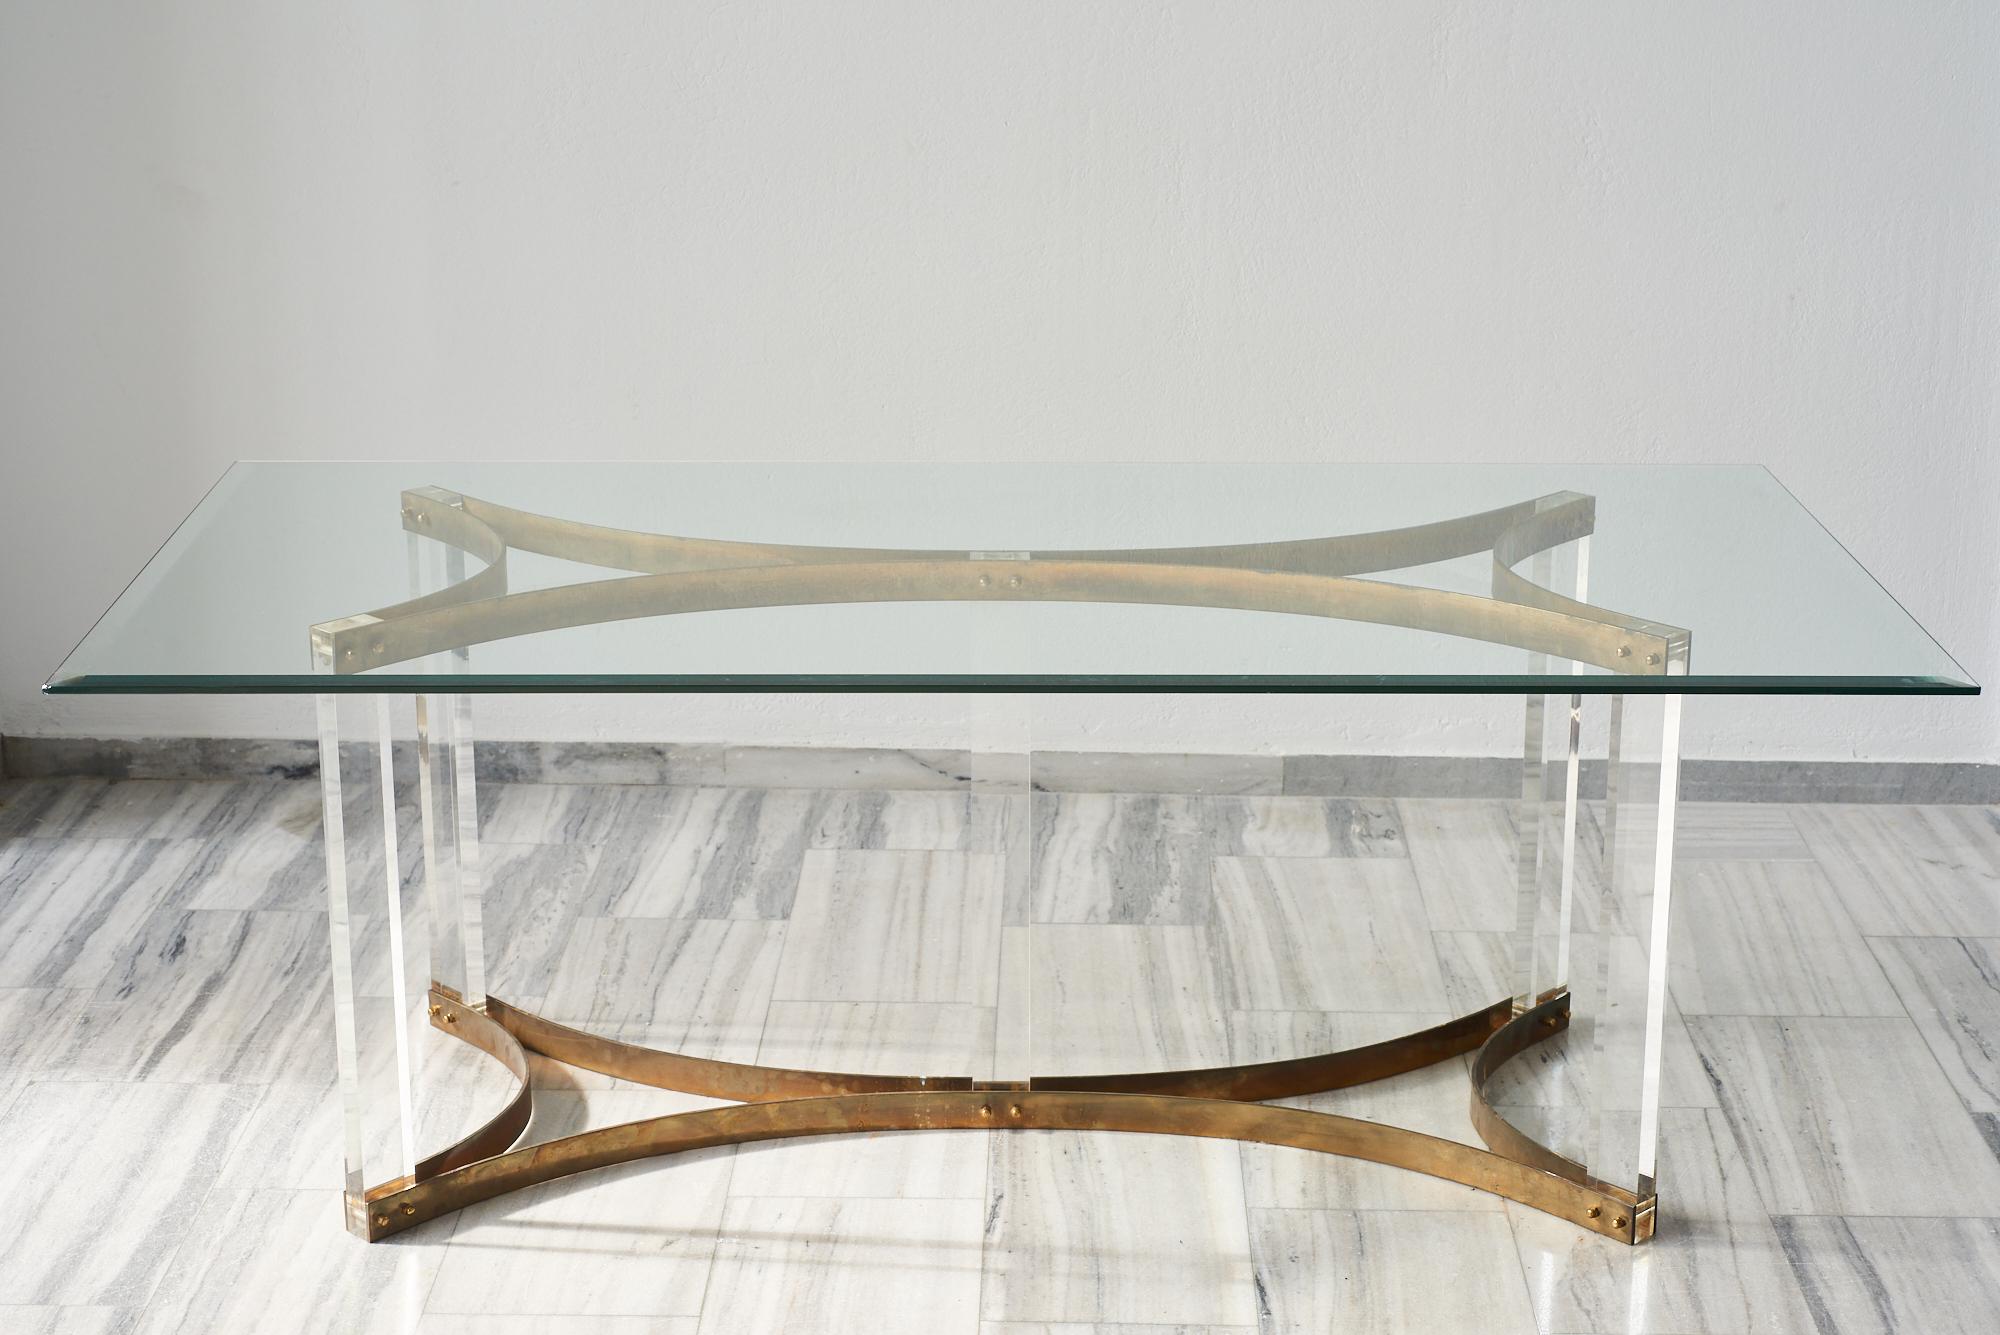 Lucite, brass and glass dining table by Alessandro Albrizzi, Italy 1970s.

Alessandro Albrizzi opened up his first of many shops all over the world in 1968 at One Sloan Square in London. When the words 